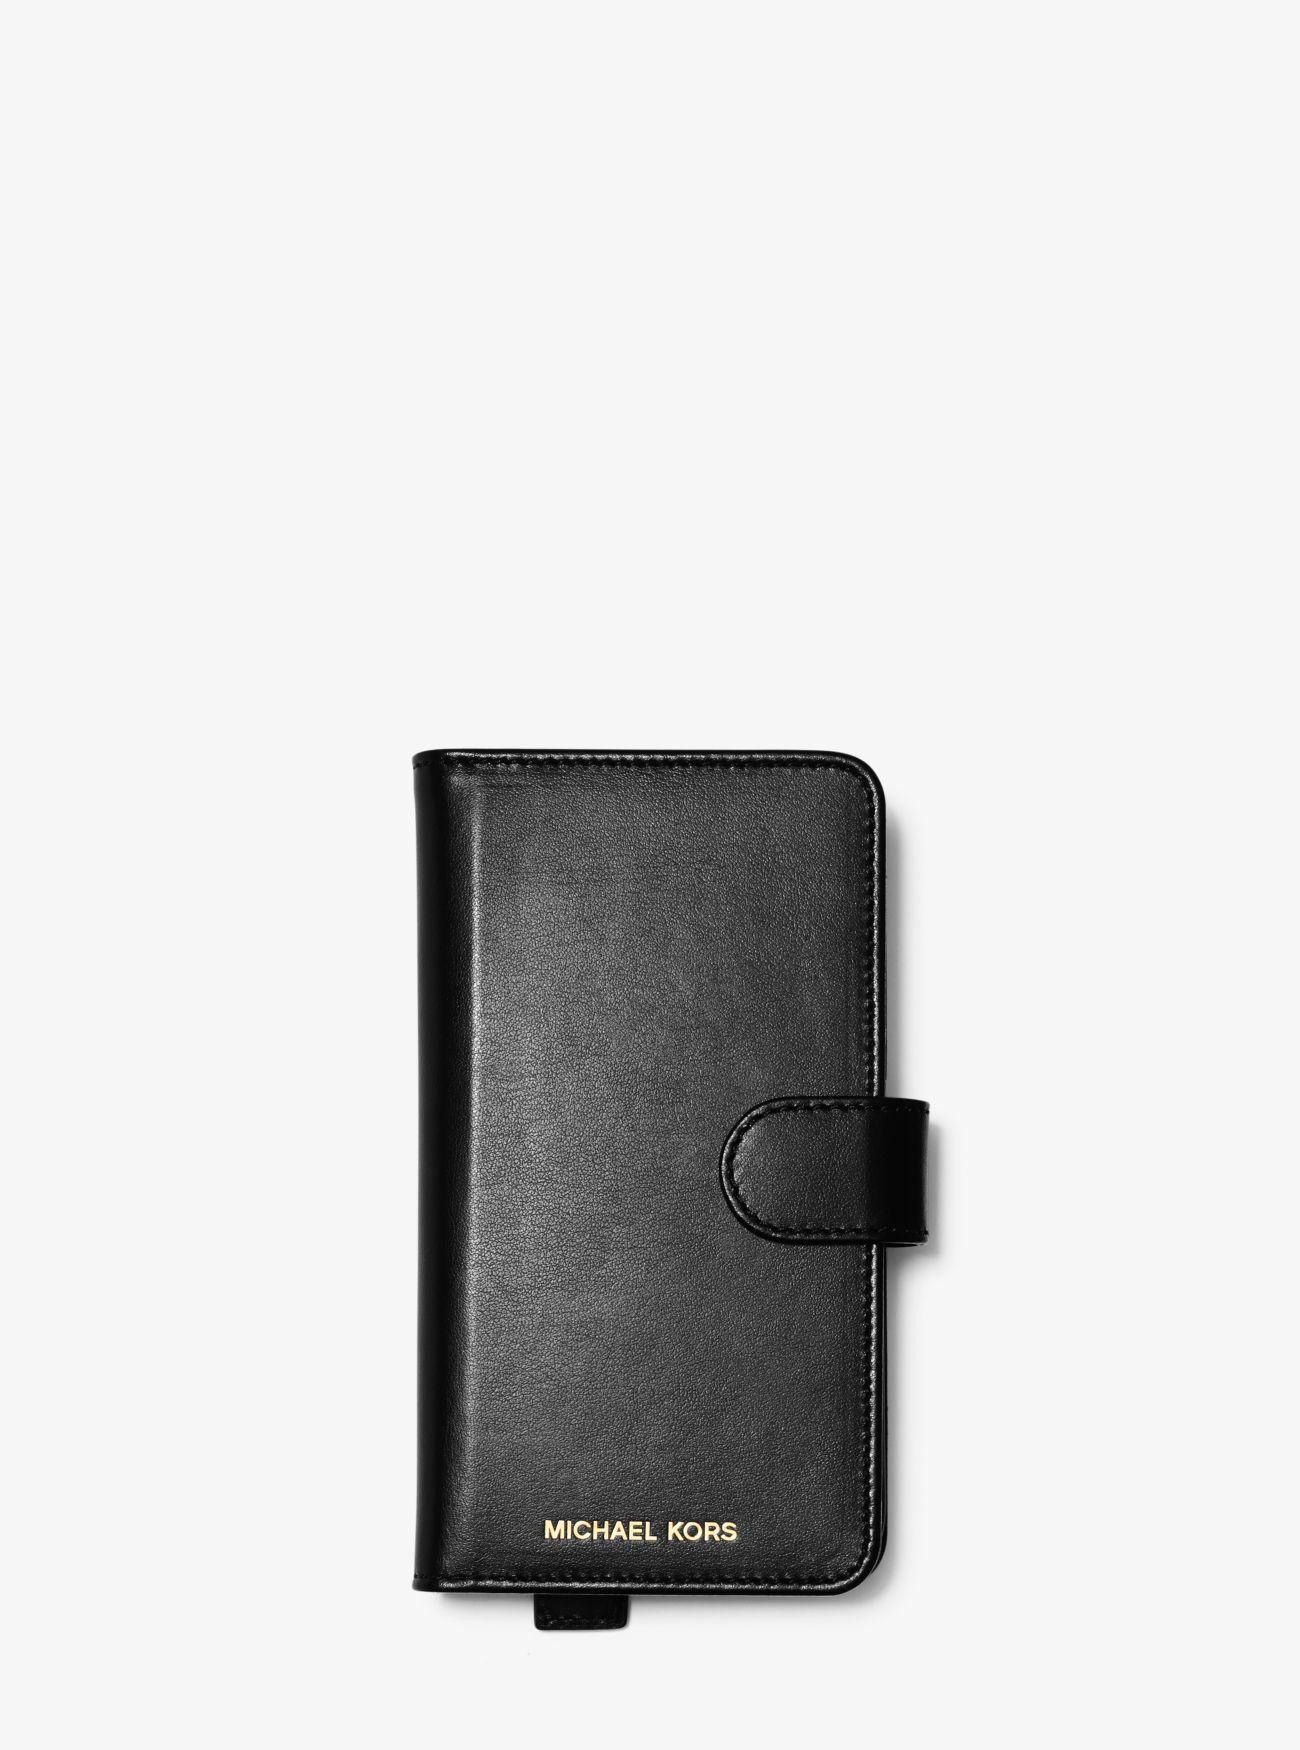 Michael Kors Leather Hand-strap Folio Case For Iphone Xr Black